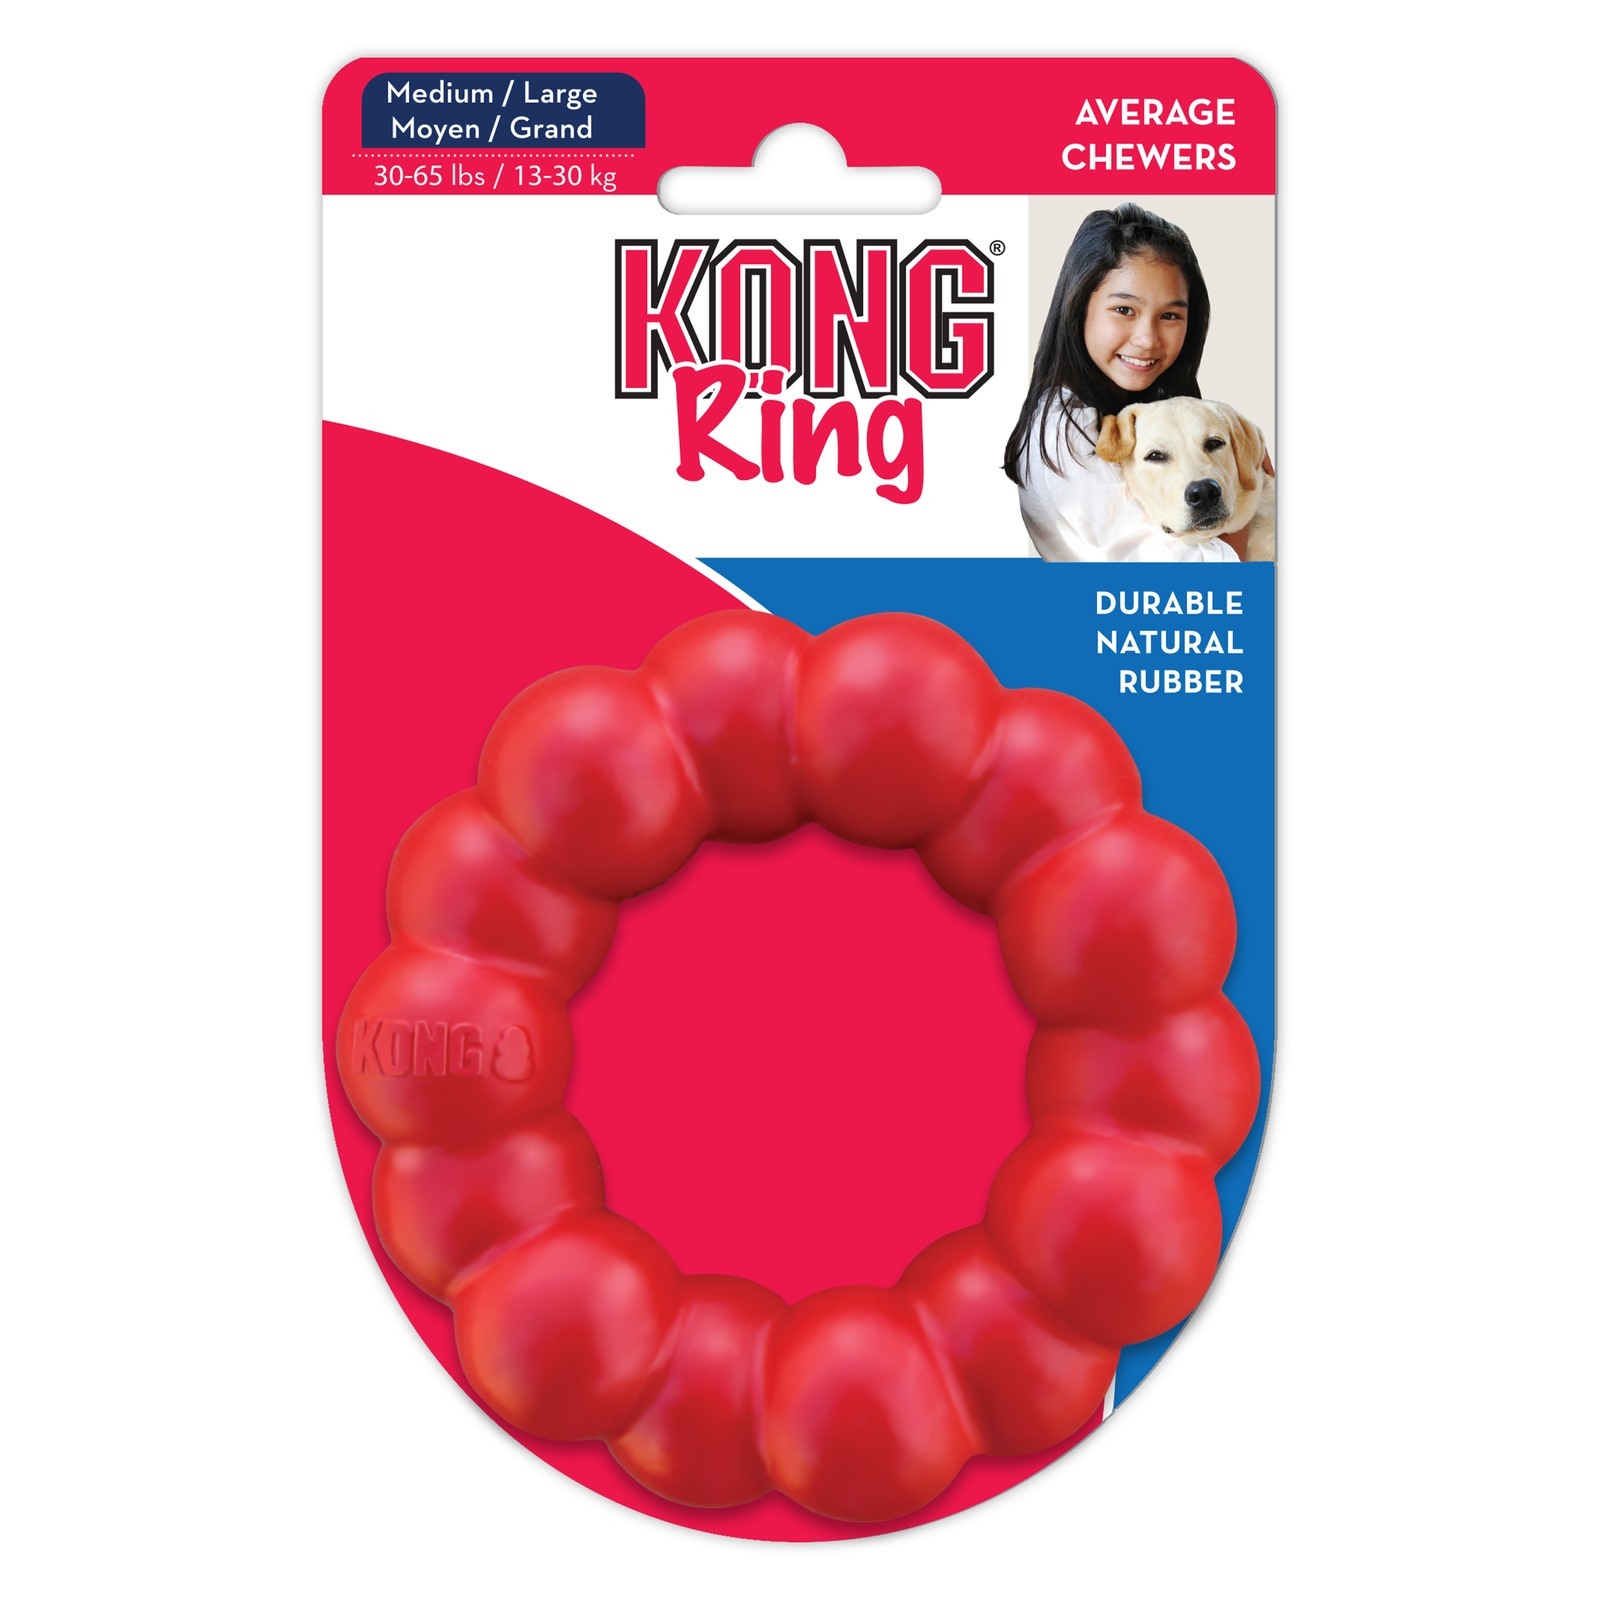 3 x KONG Natural Red Rubber Ring Dog Toy for Healthy Teeth & Gums - Medium/Large image 0